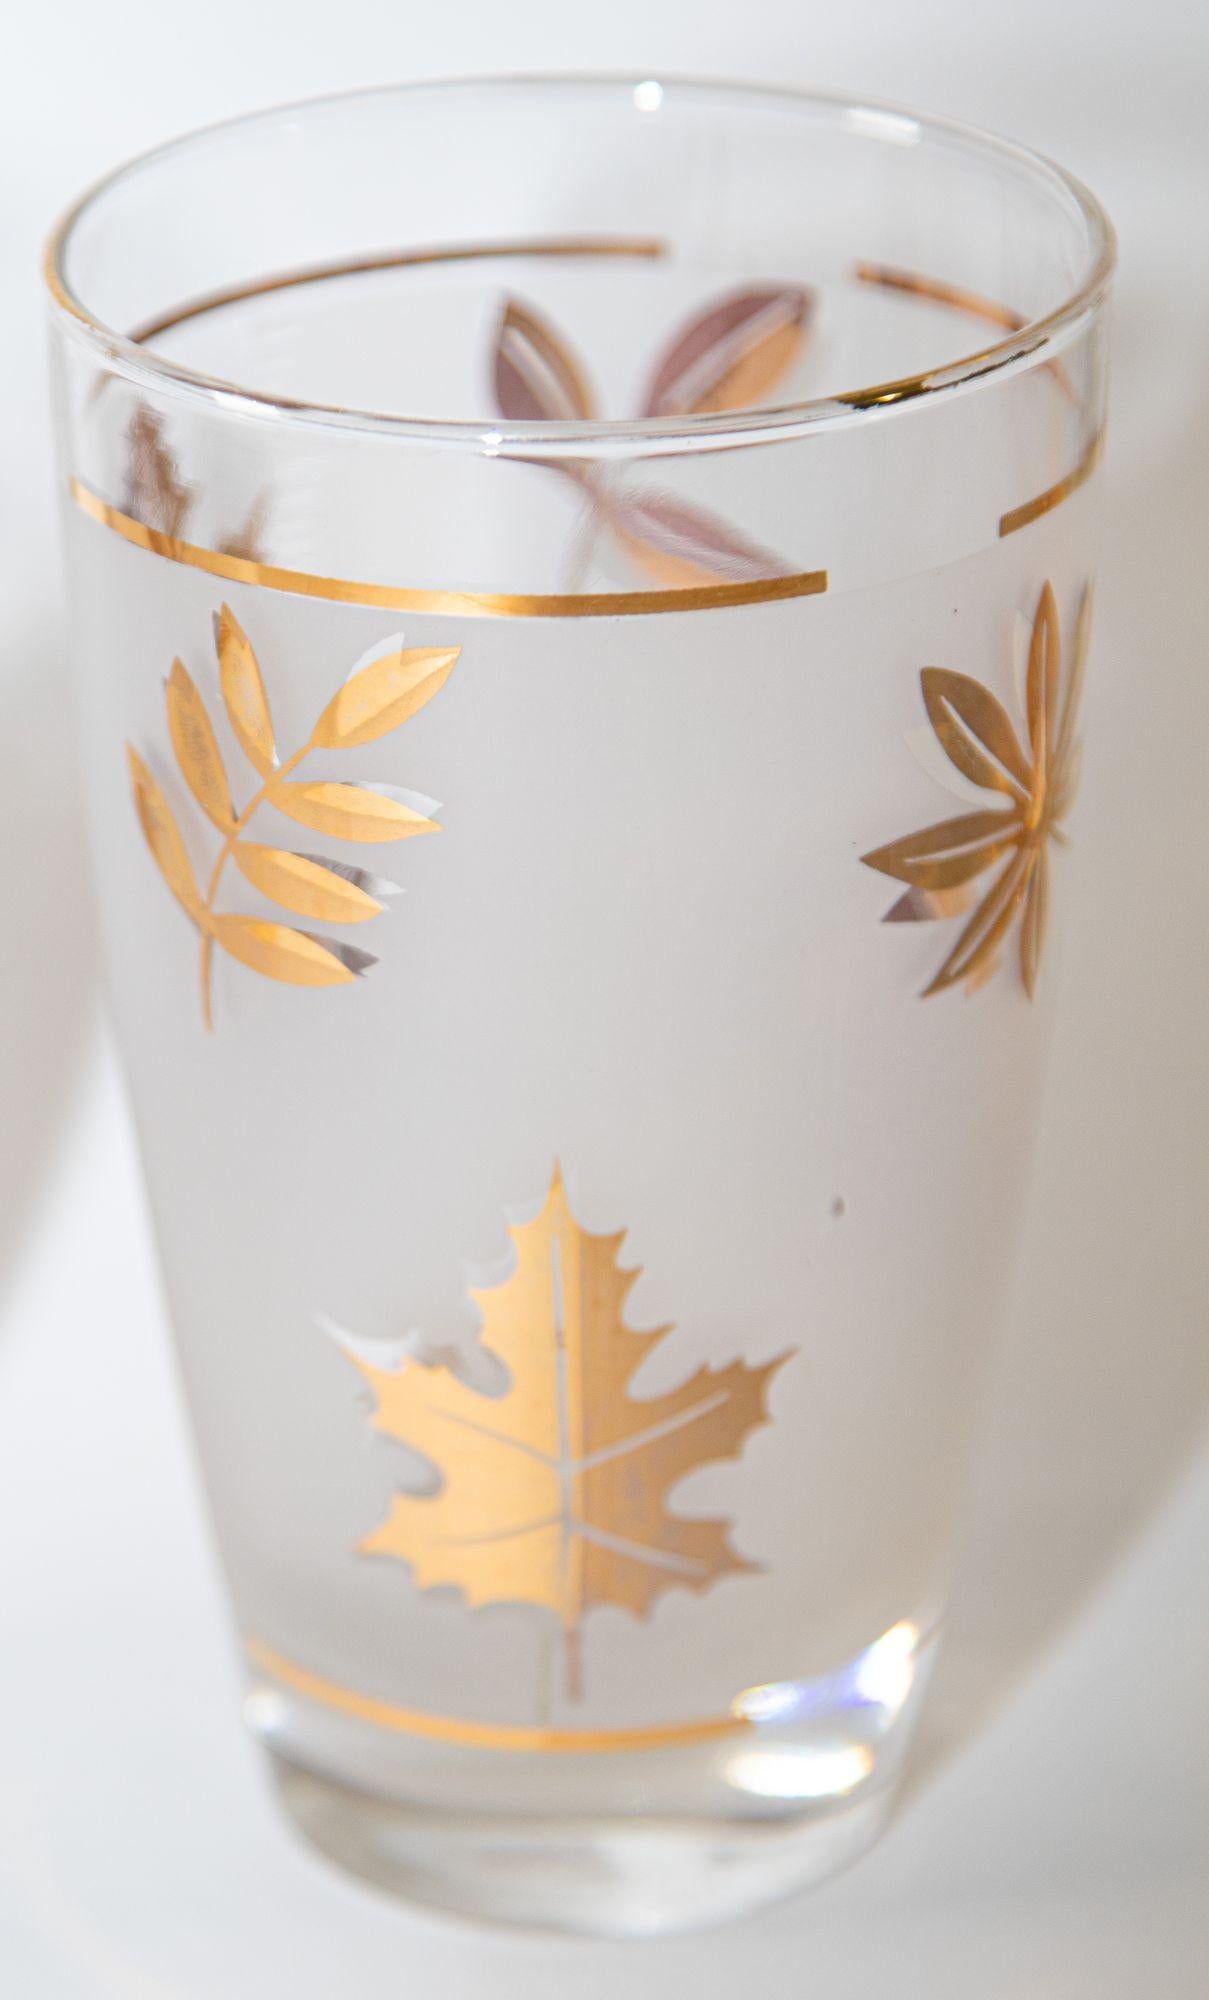 Mid-Century Modern Vintage Libbey Frosted & Golden Foliage Cocktail Glasses, Set of 4 For Sale